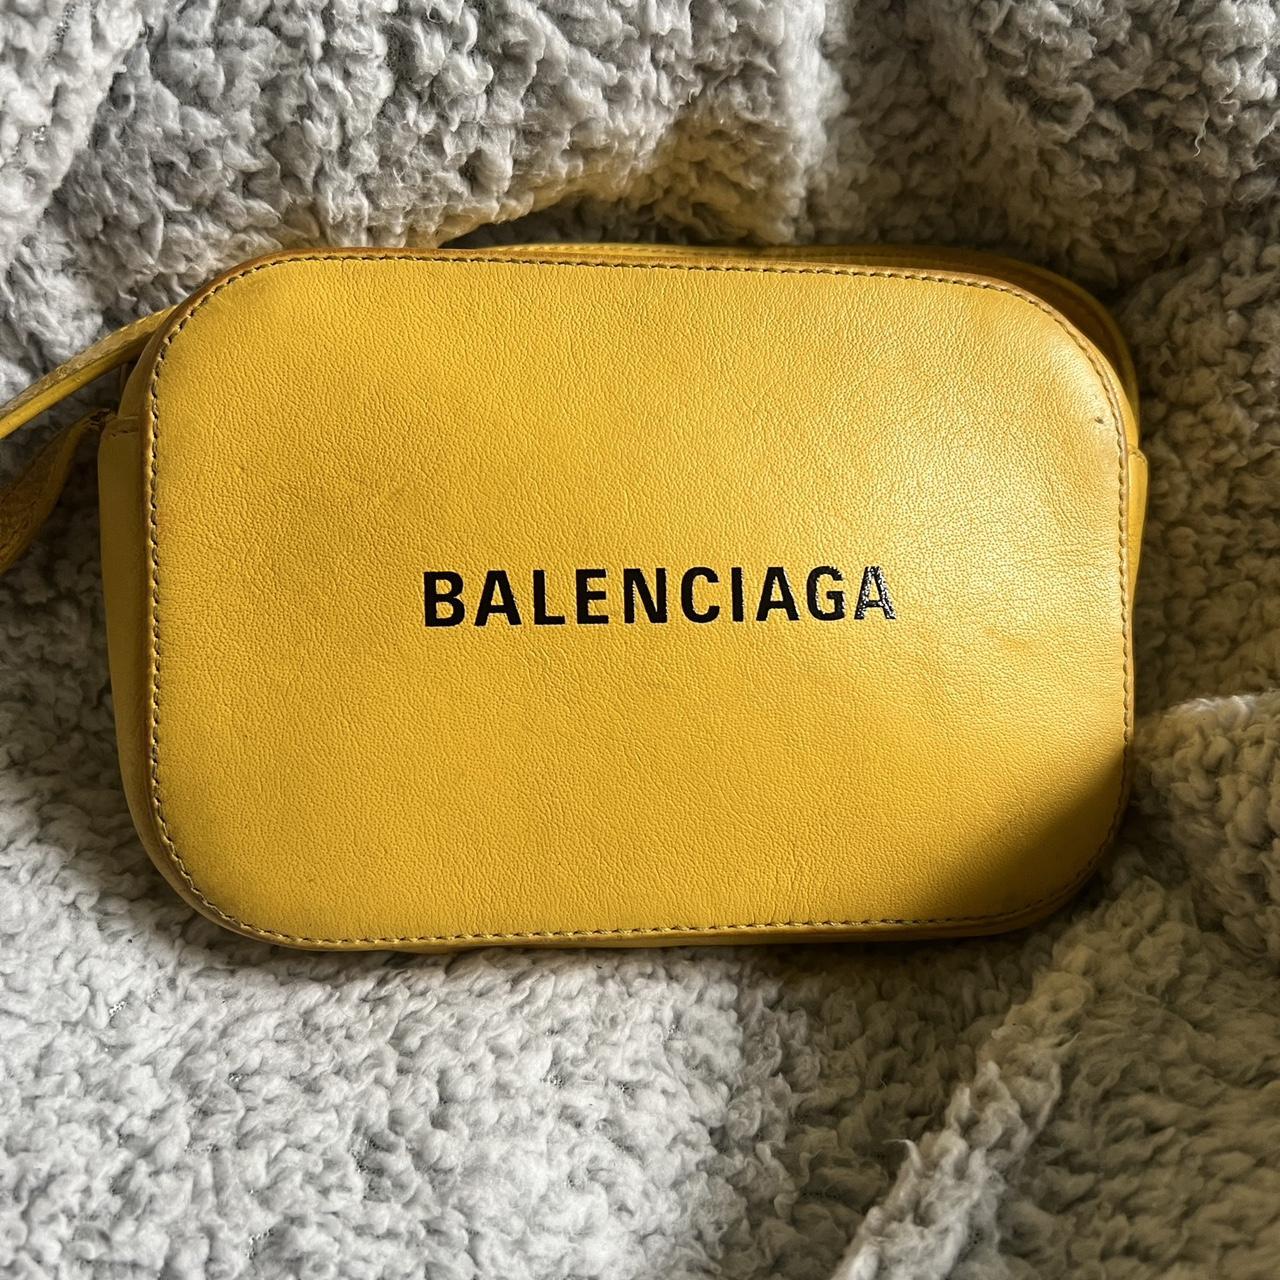 Camera bag authentic used flaws shown in... - Depop